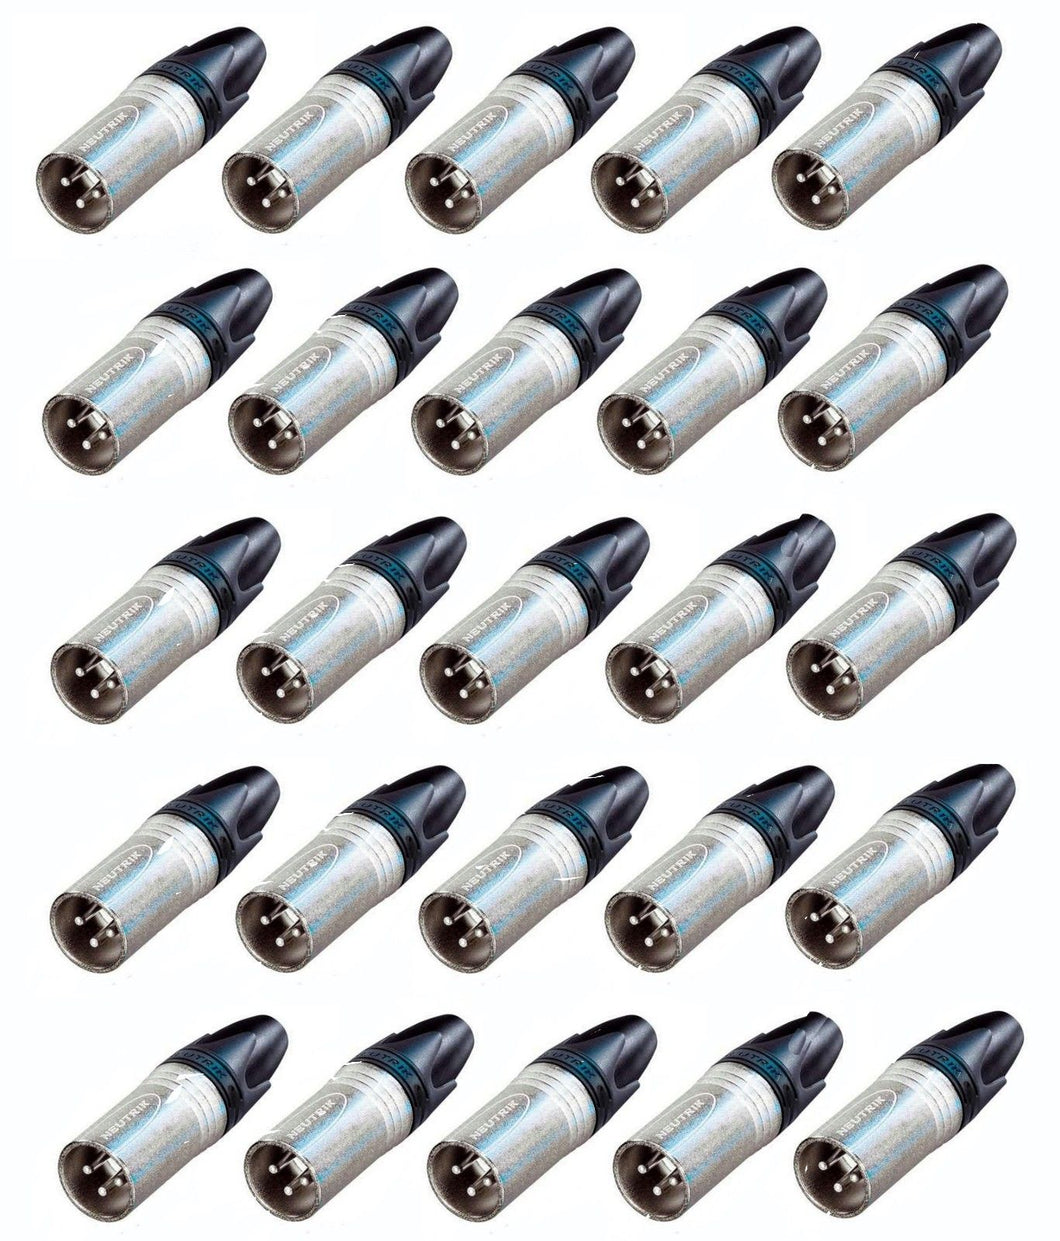 (25 PACK) NEUTRIK NC3MXX 3-Pin XLR Male Cable Mount Connector - Nickel Shell